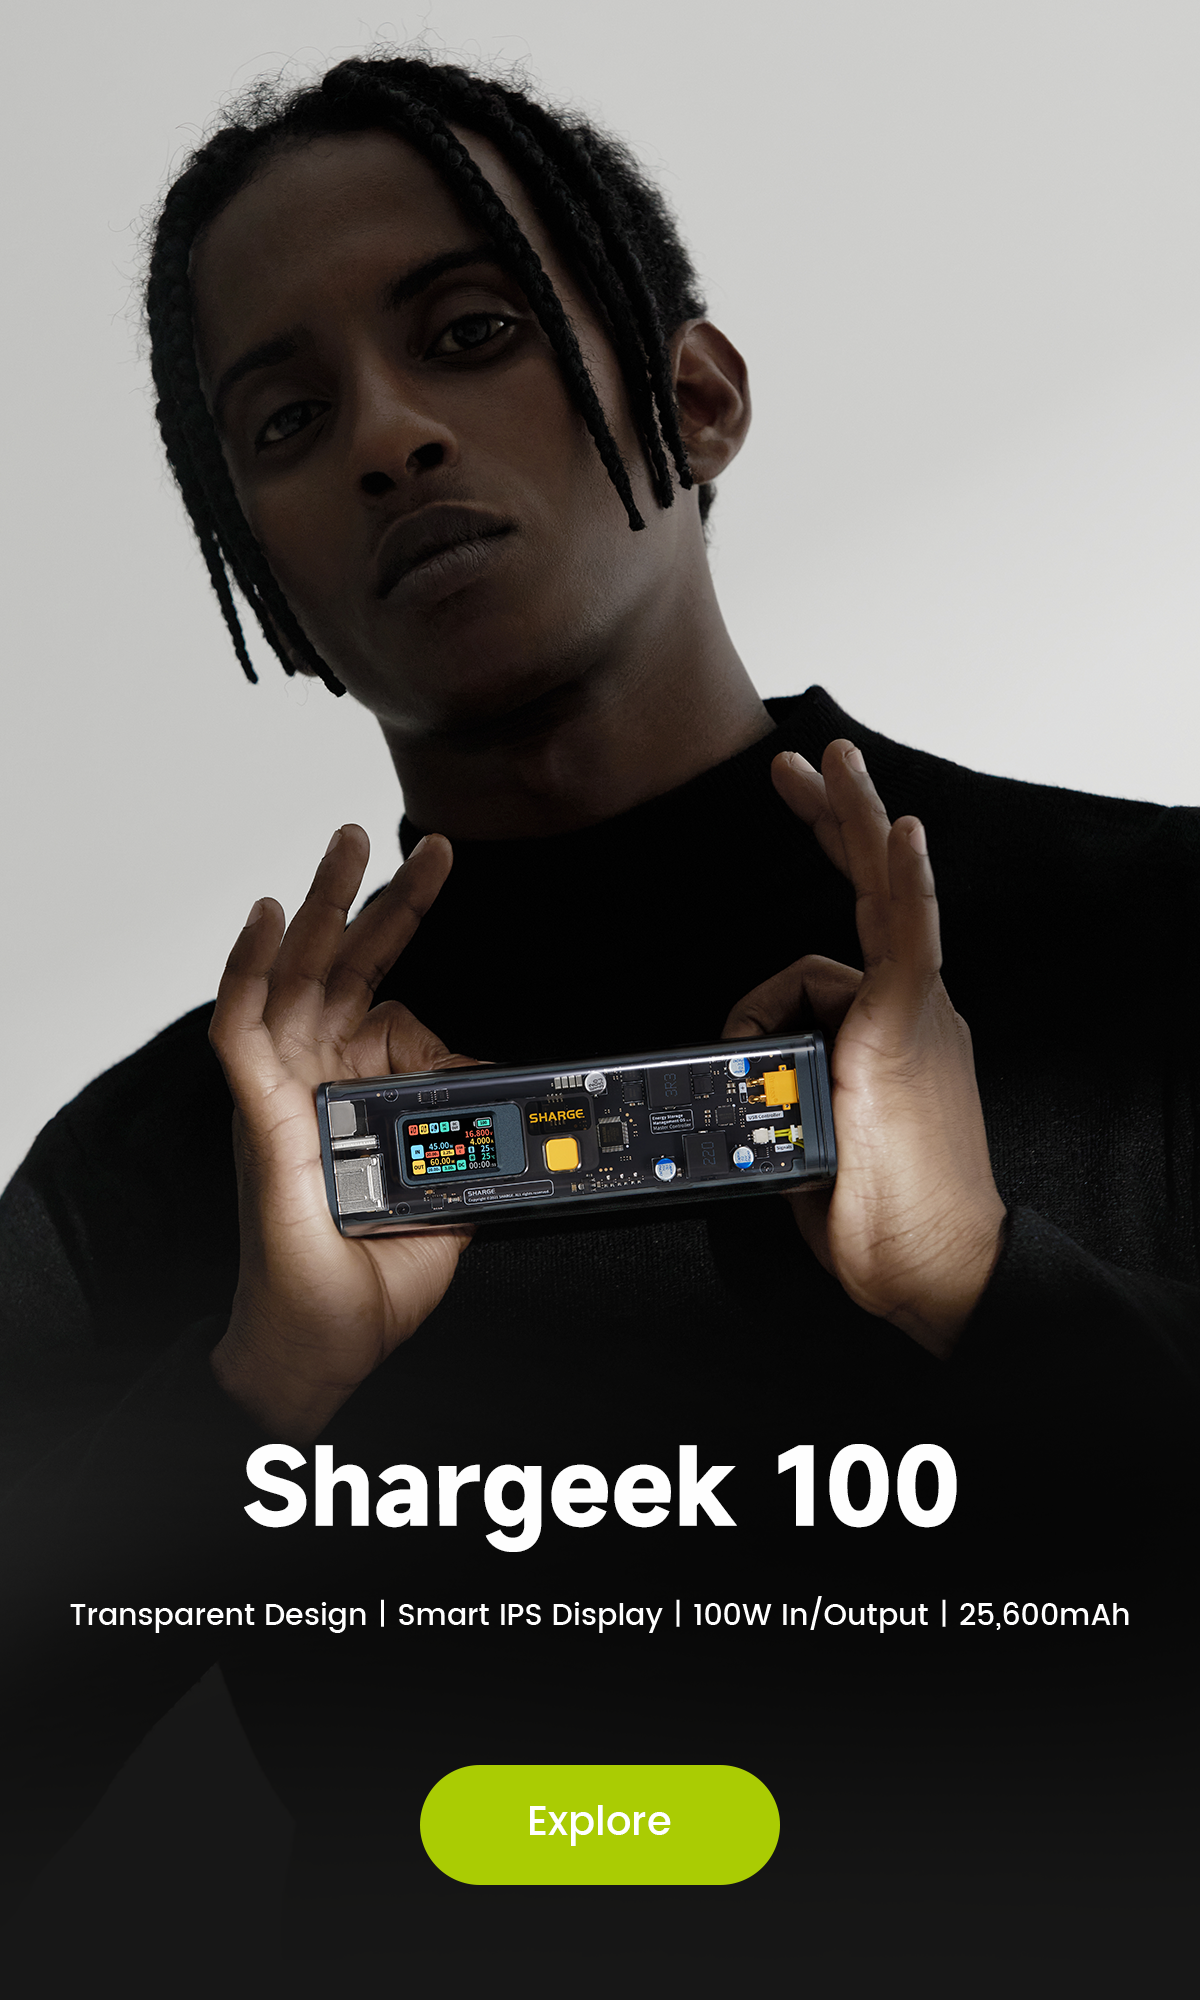 SHARGE Shargeek Storm 2 100 Power Bank